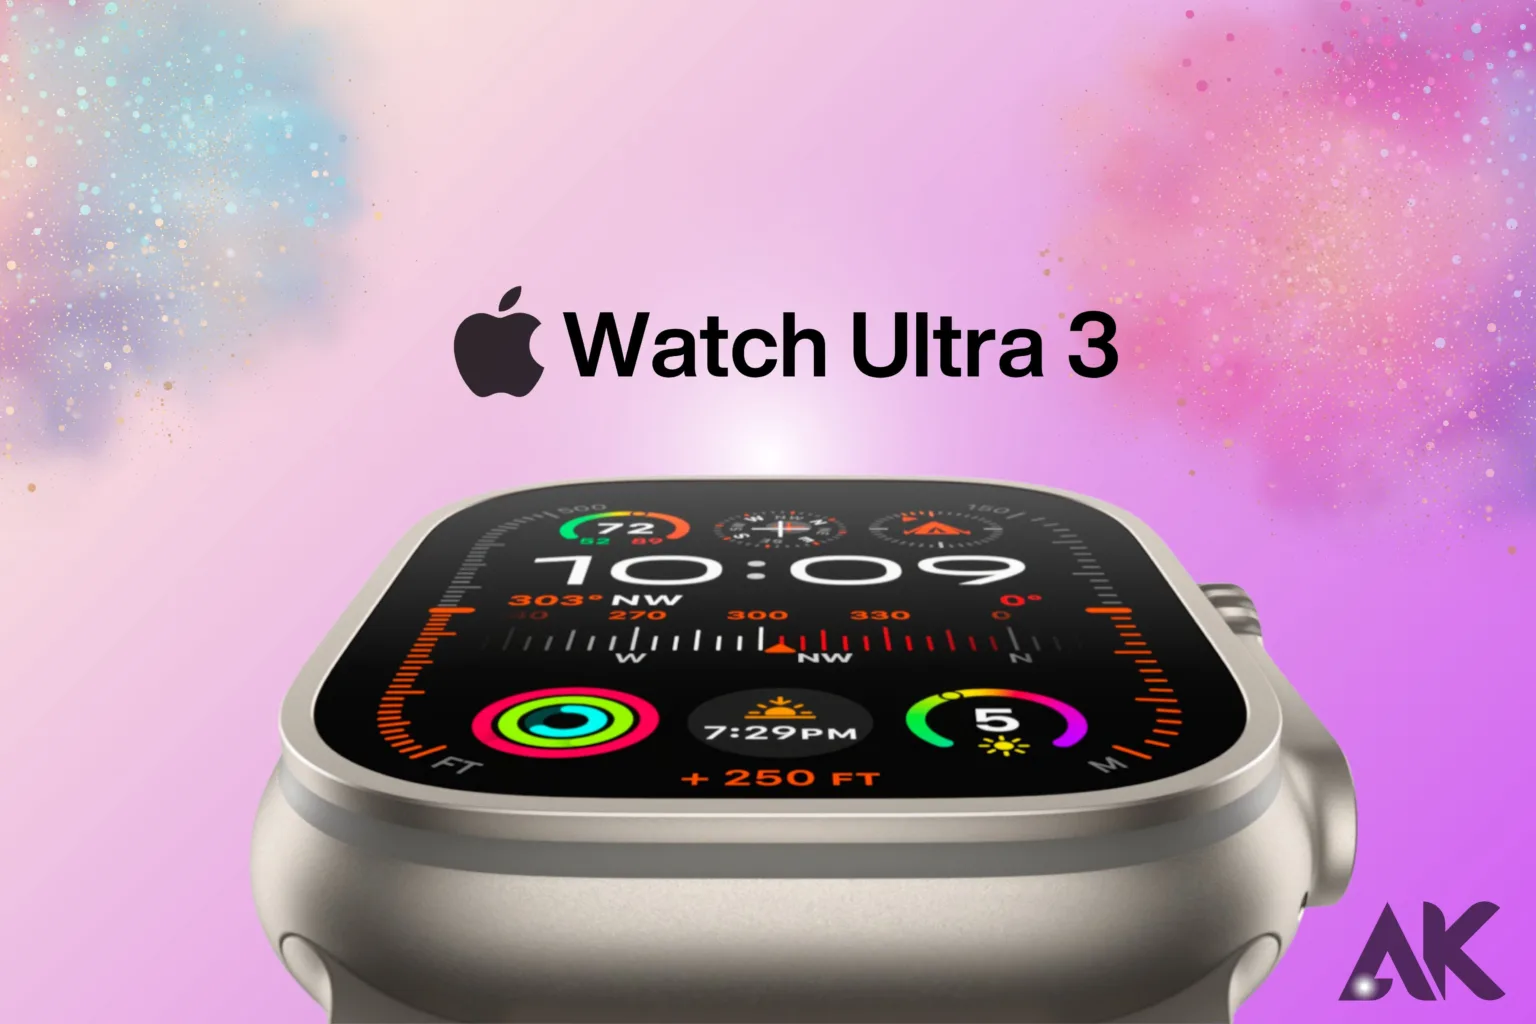 Explore Apple Watch Ultra 3 Specifications - Complete Details Inside